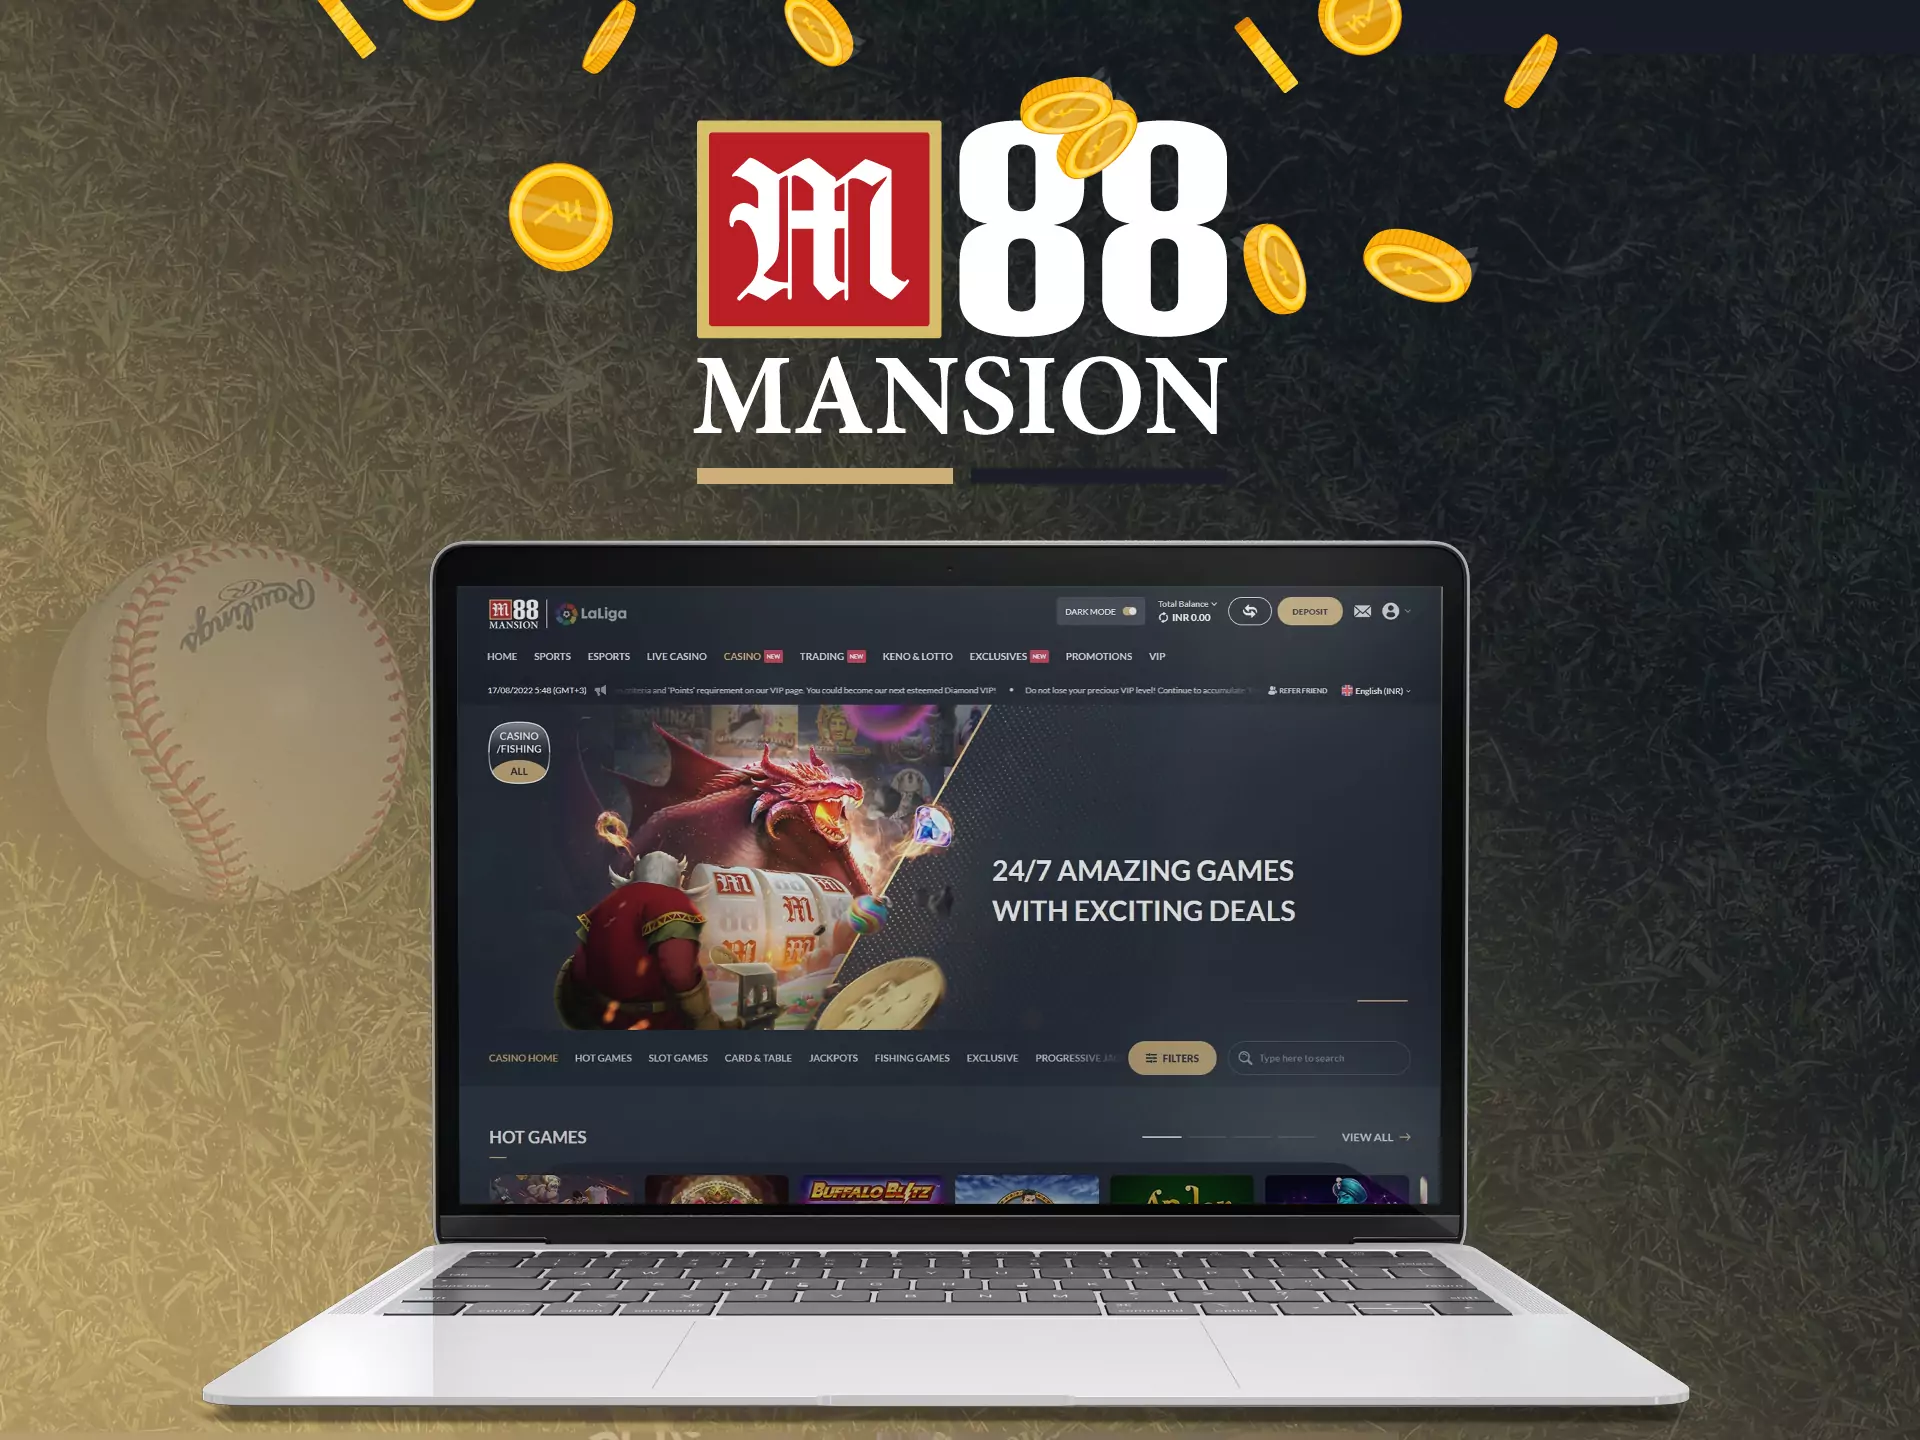 Besides betting, you can play casino games on M88.